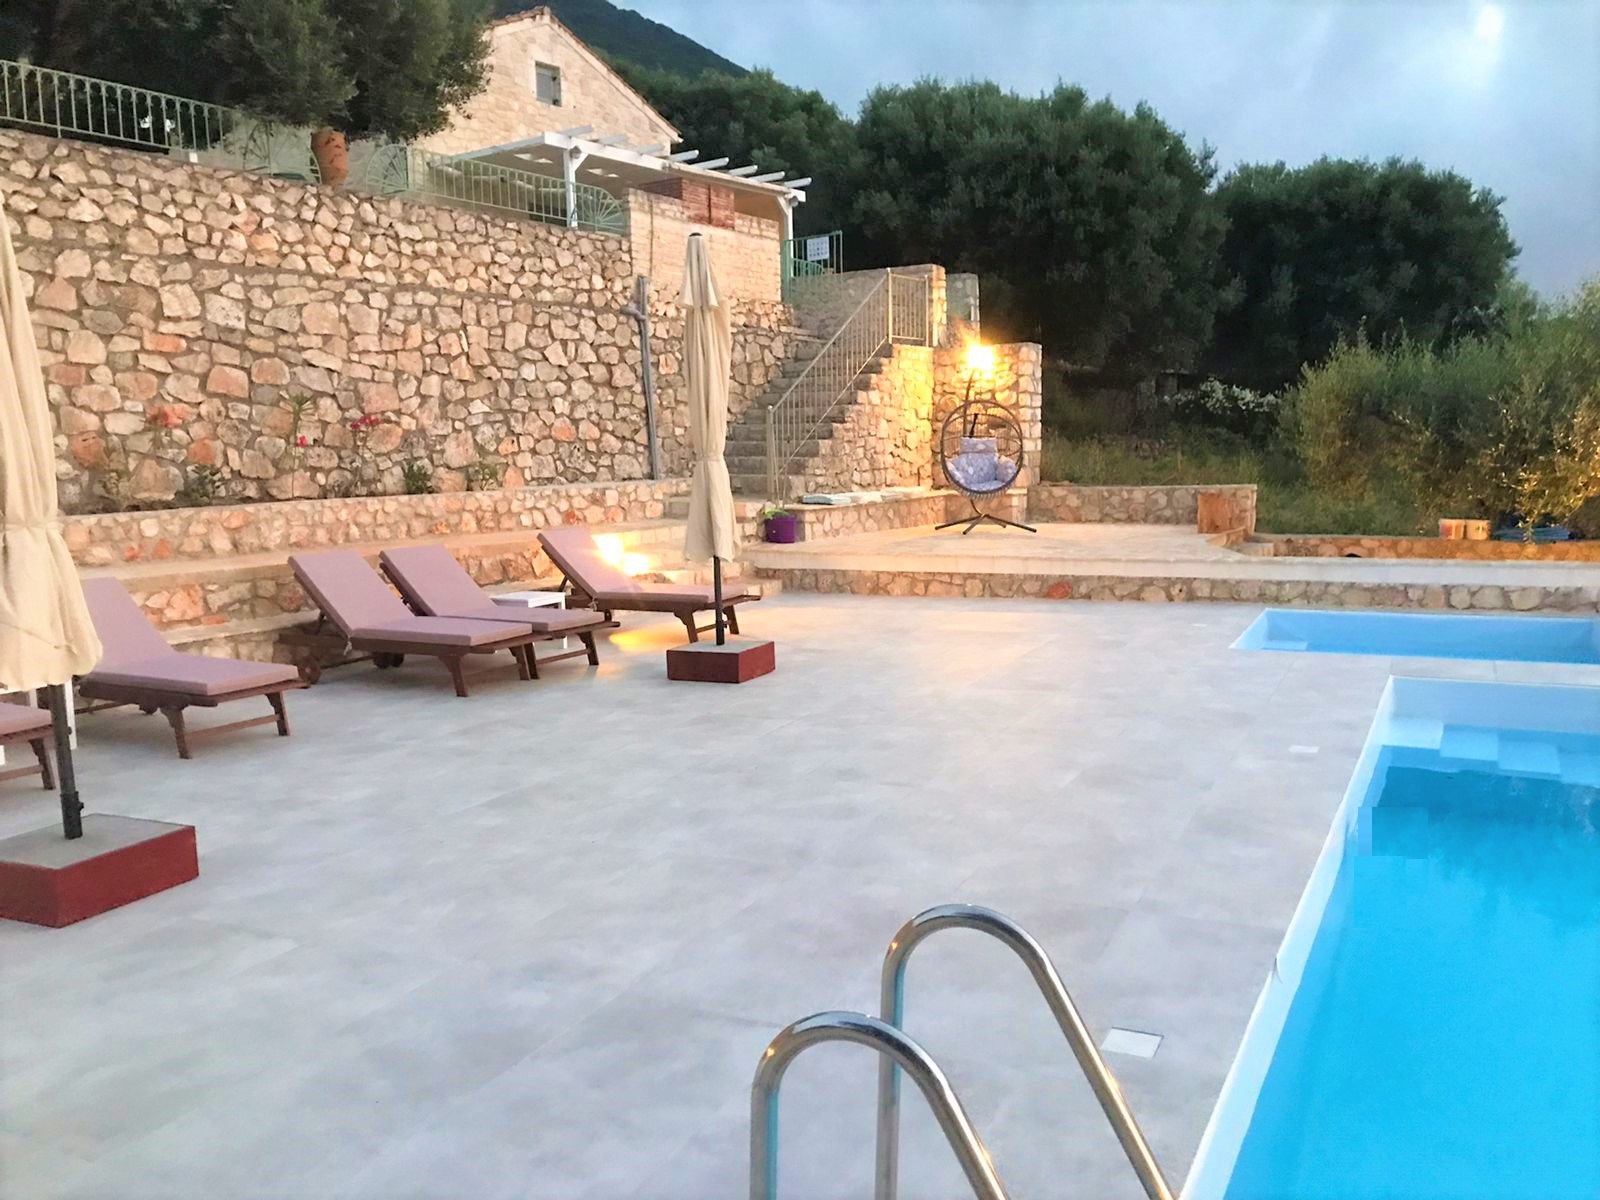 Swimming pool area of villa for rent on Ithaca Greece, Stavros